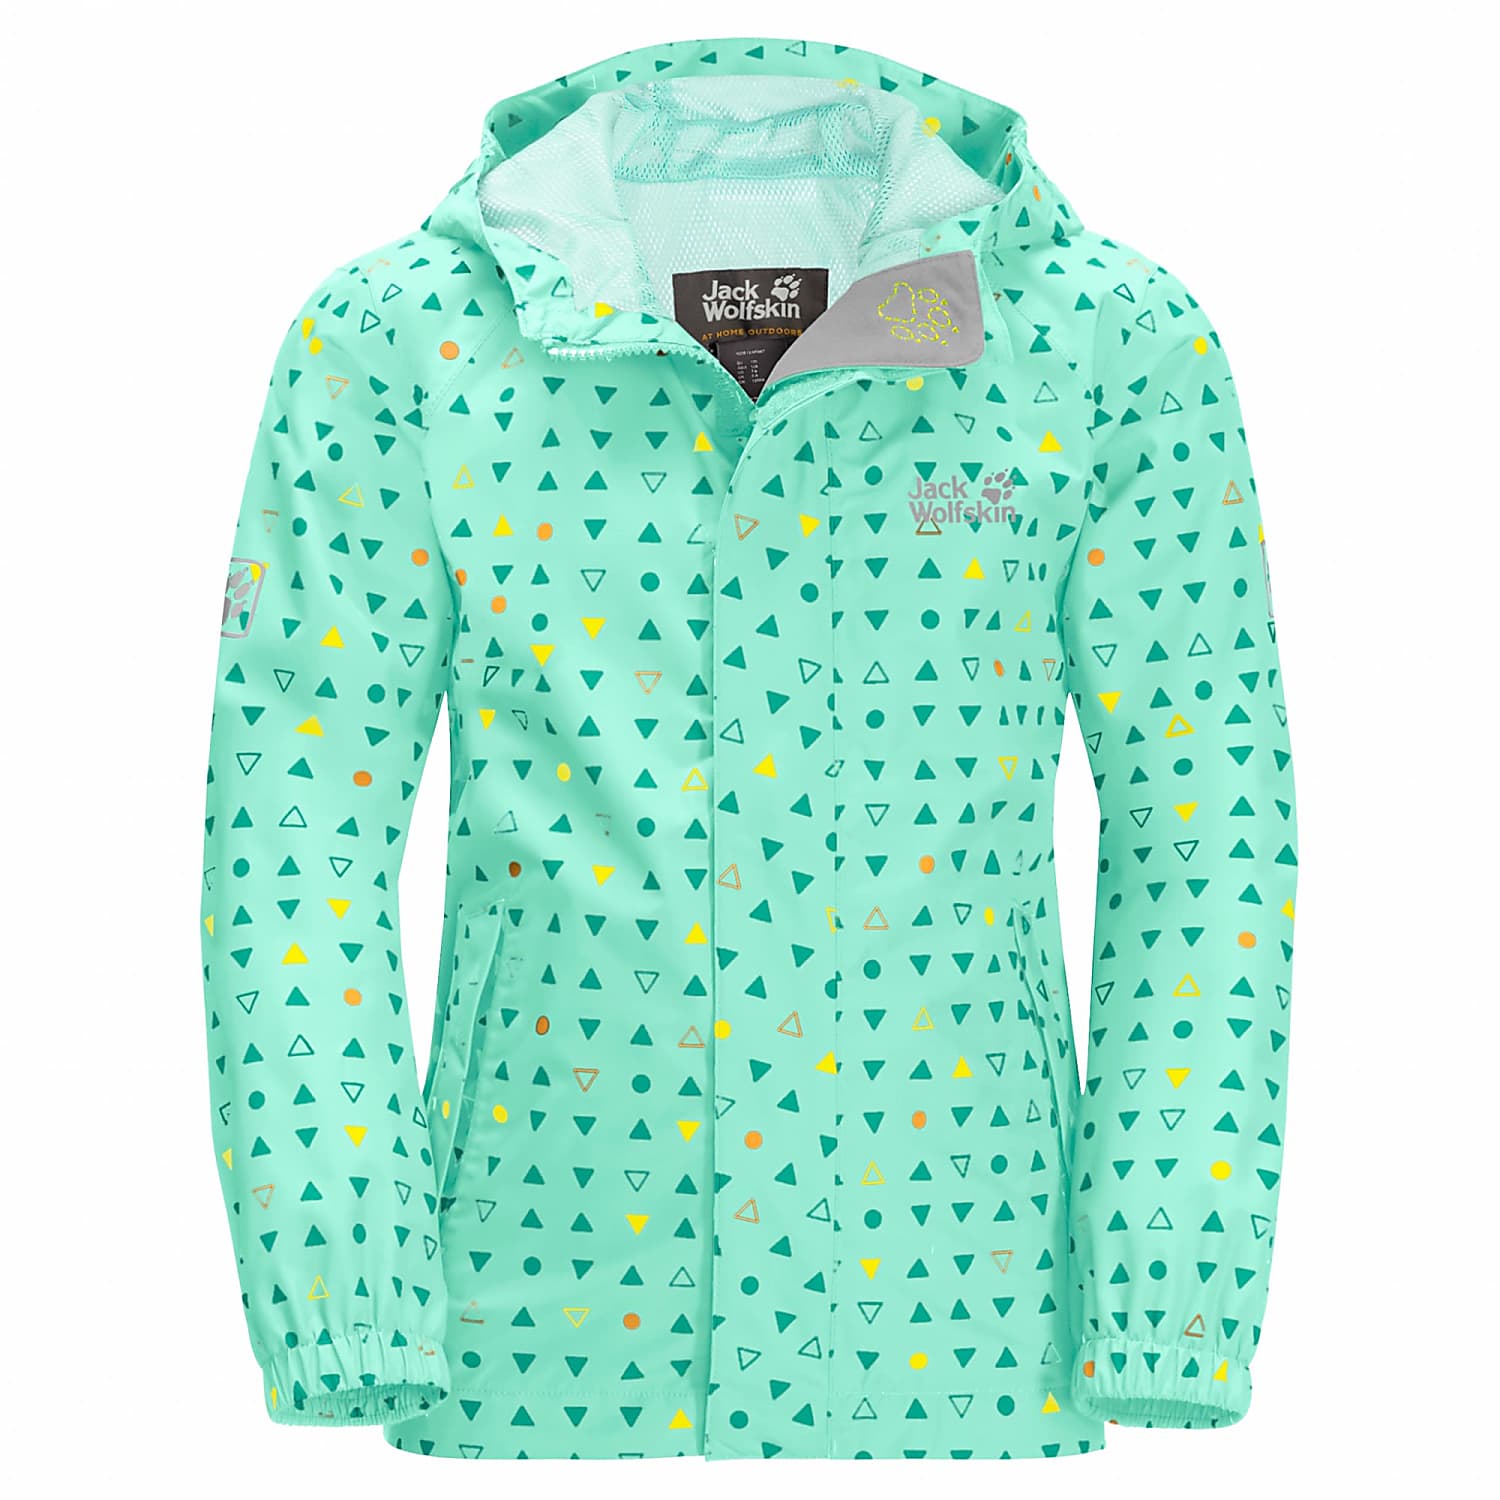 All Opal DOTTED - shipping cheap TUCAN JACKET, KIDS and Jack Fast Over Wolfskin